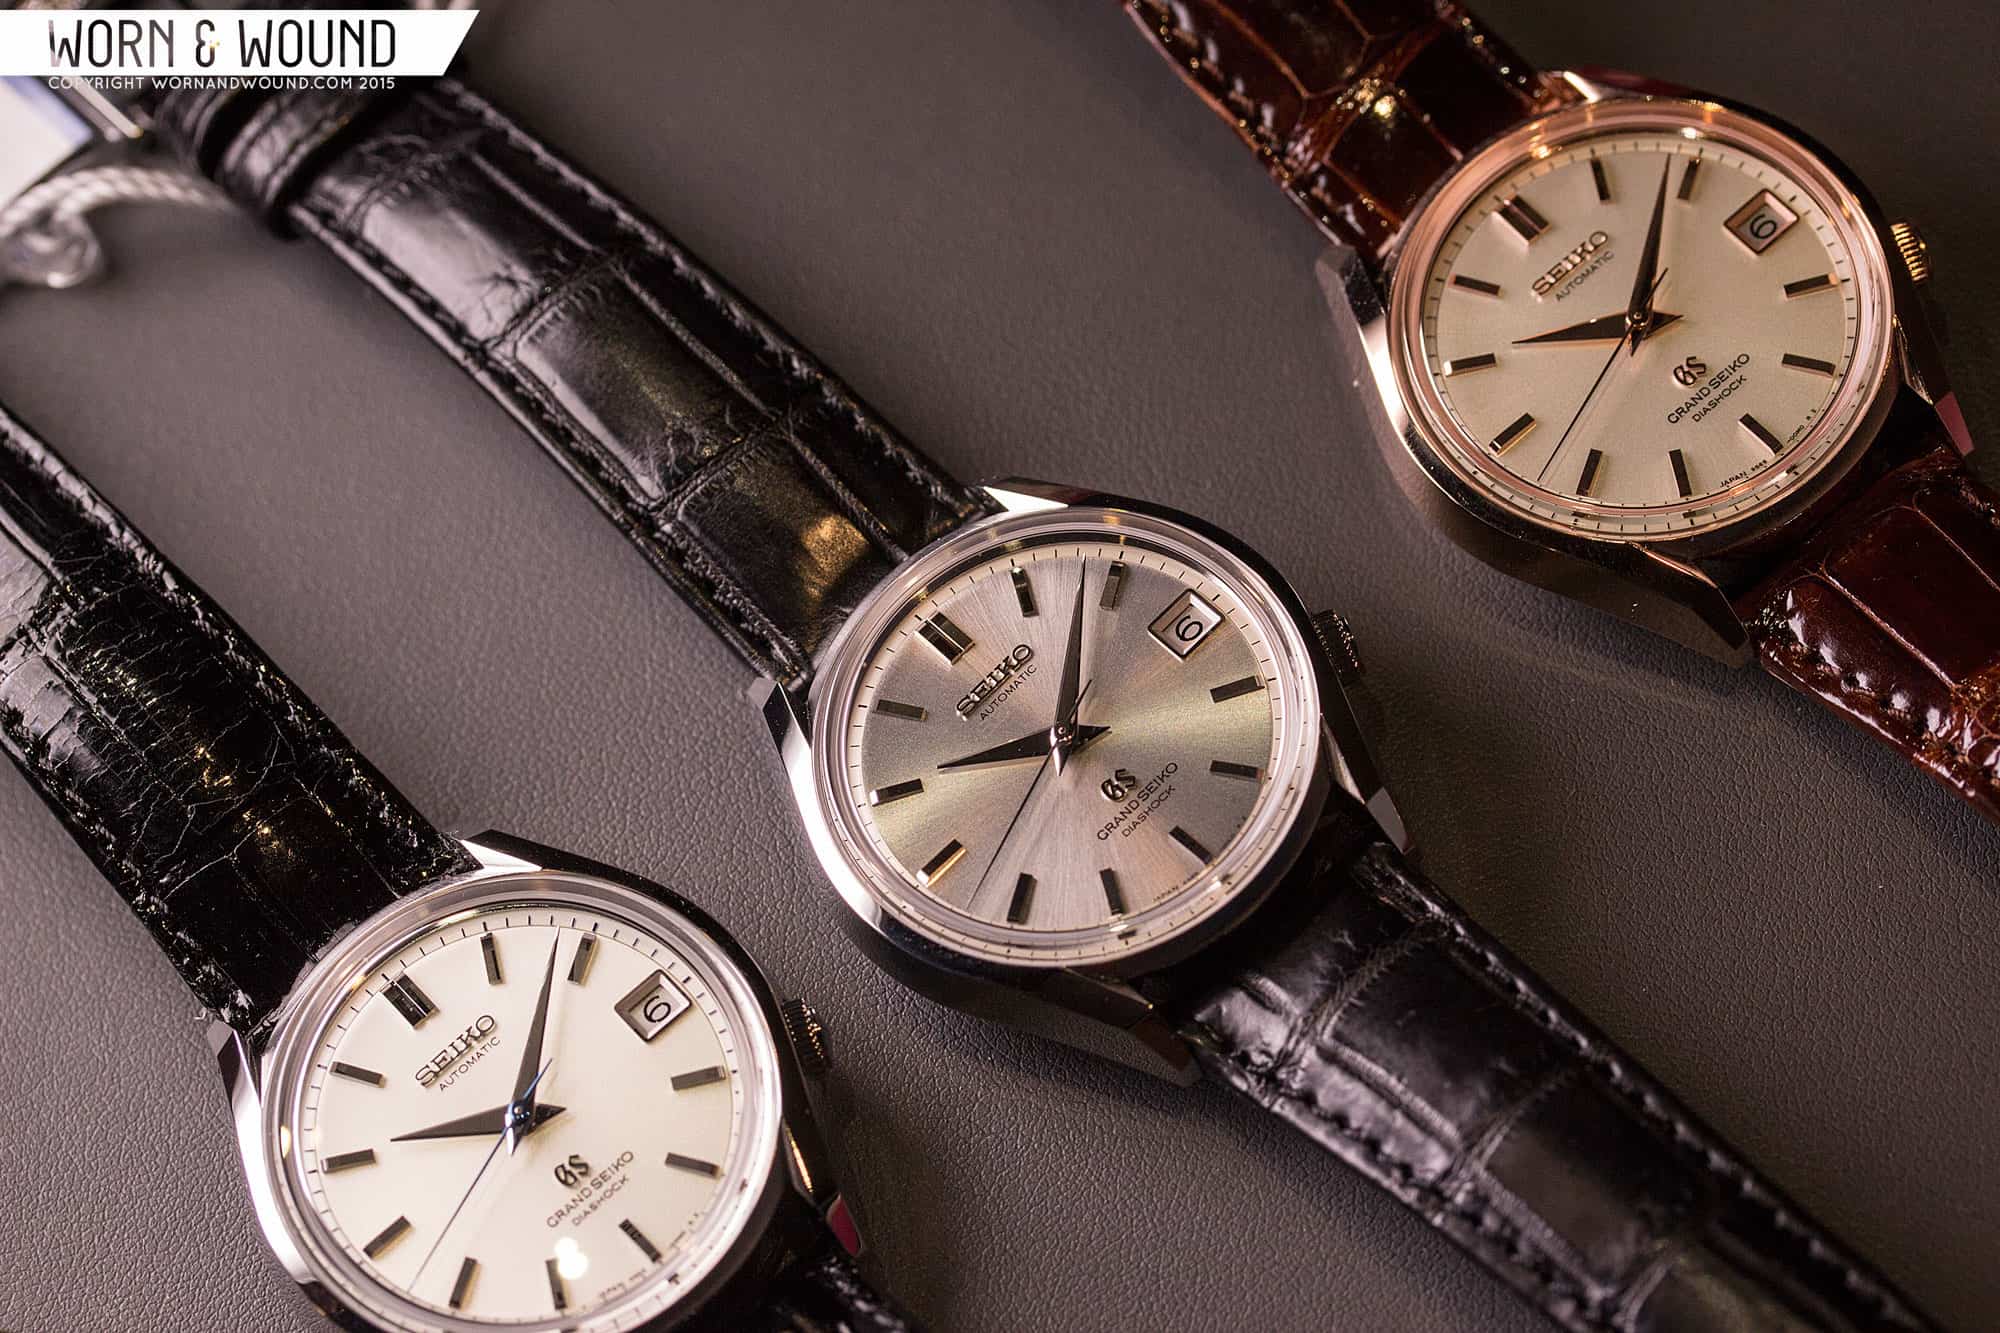 Seiko Introduces Two Very Different Vintage Inspired Pieces - Worn & Wound